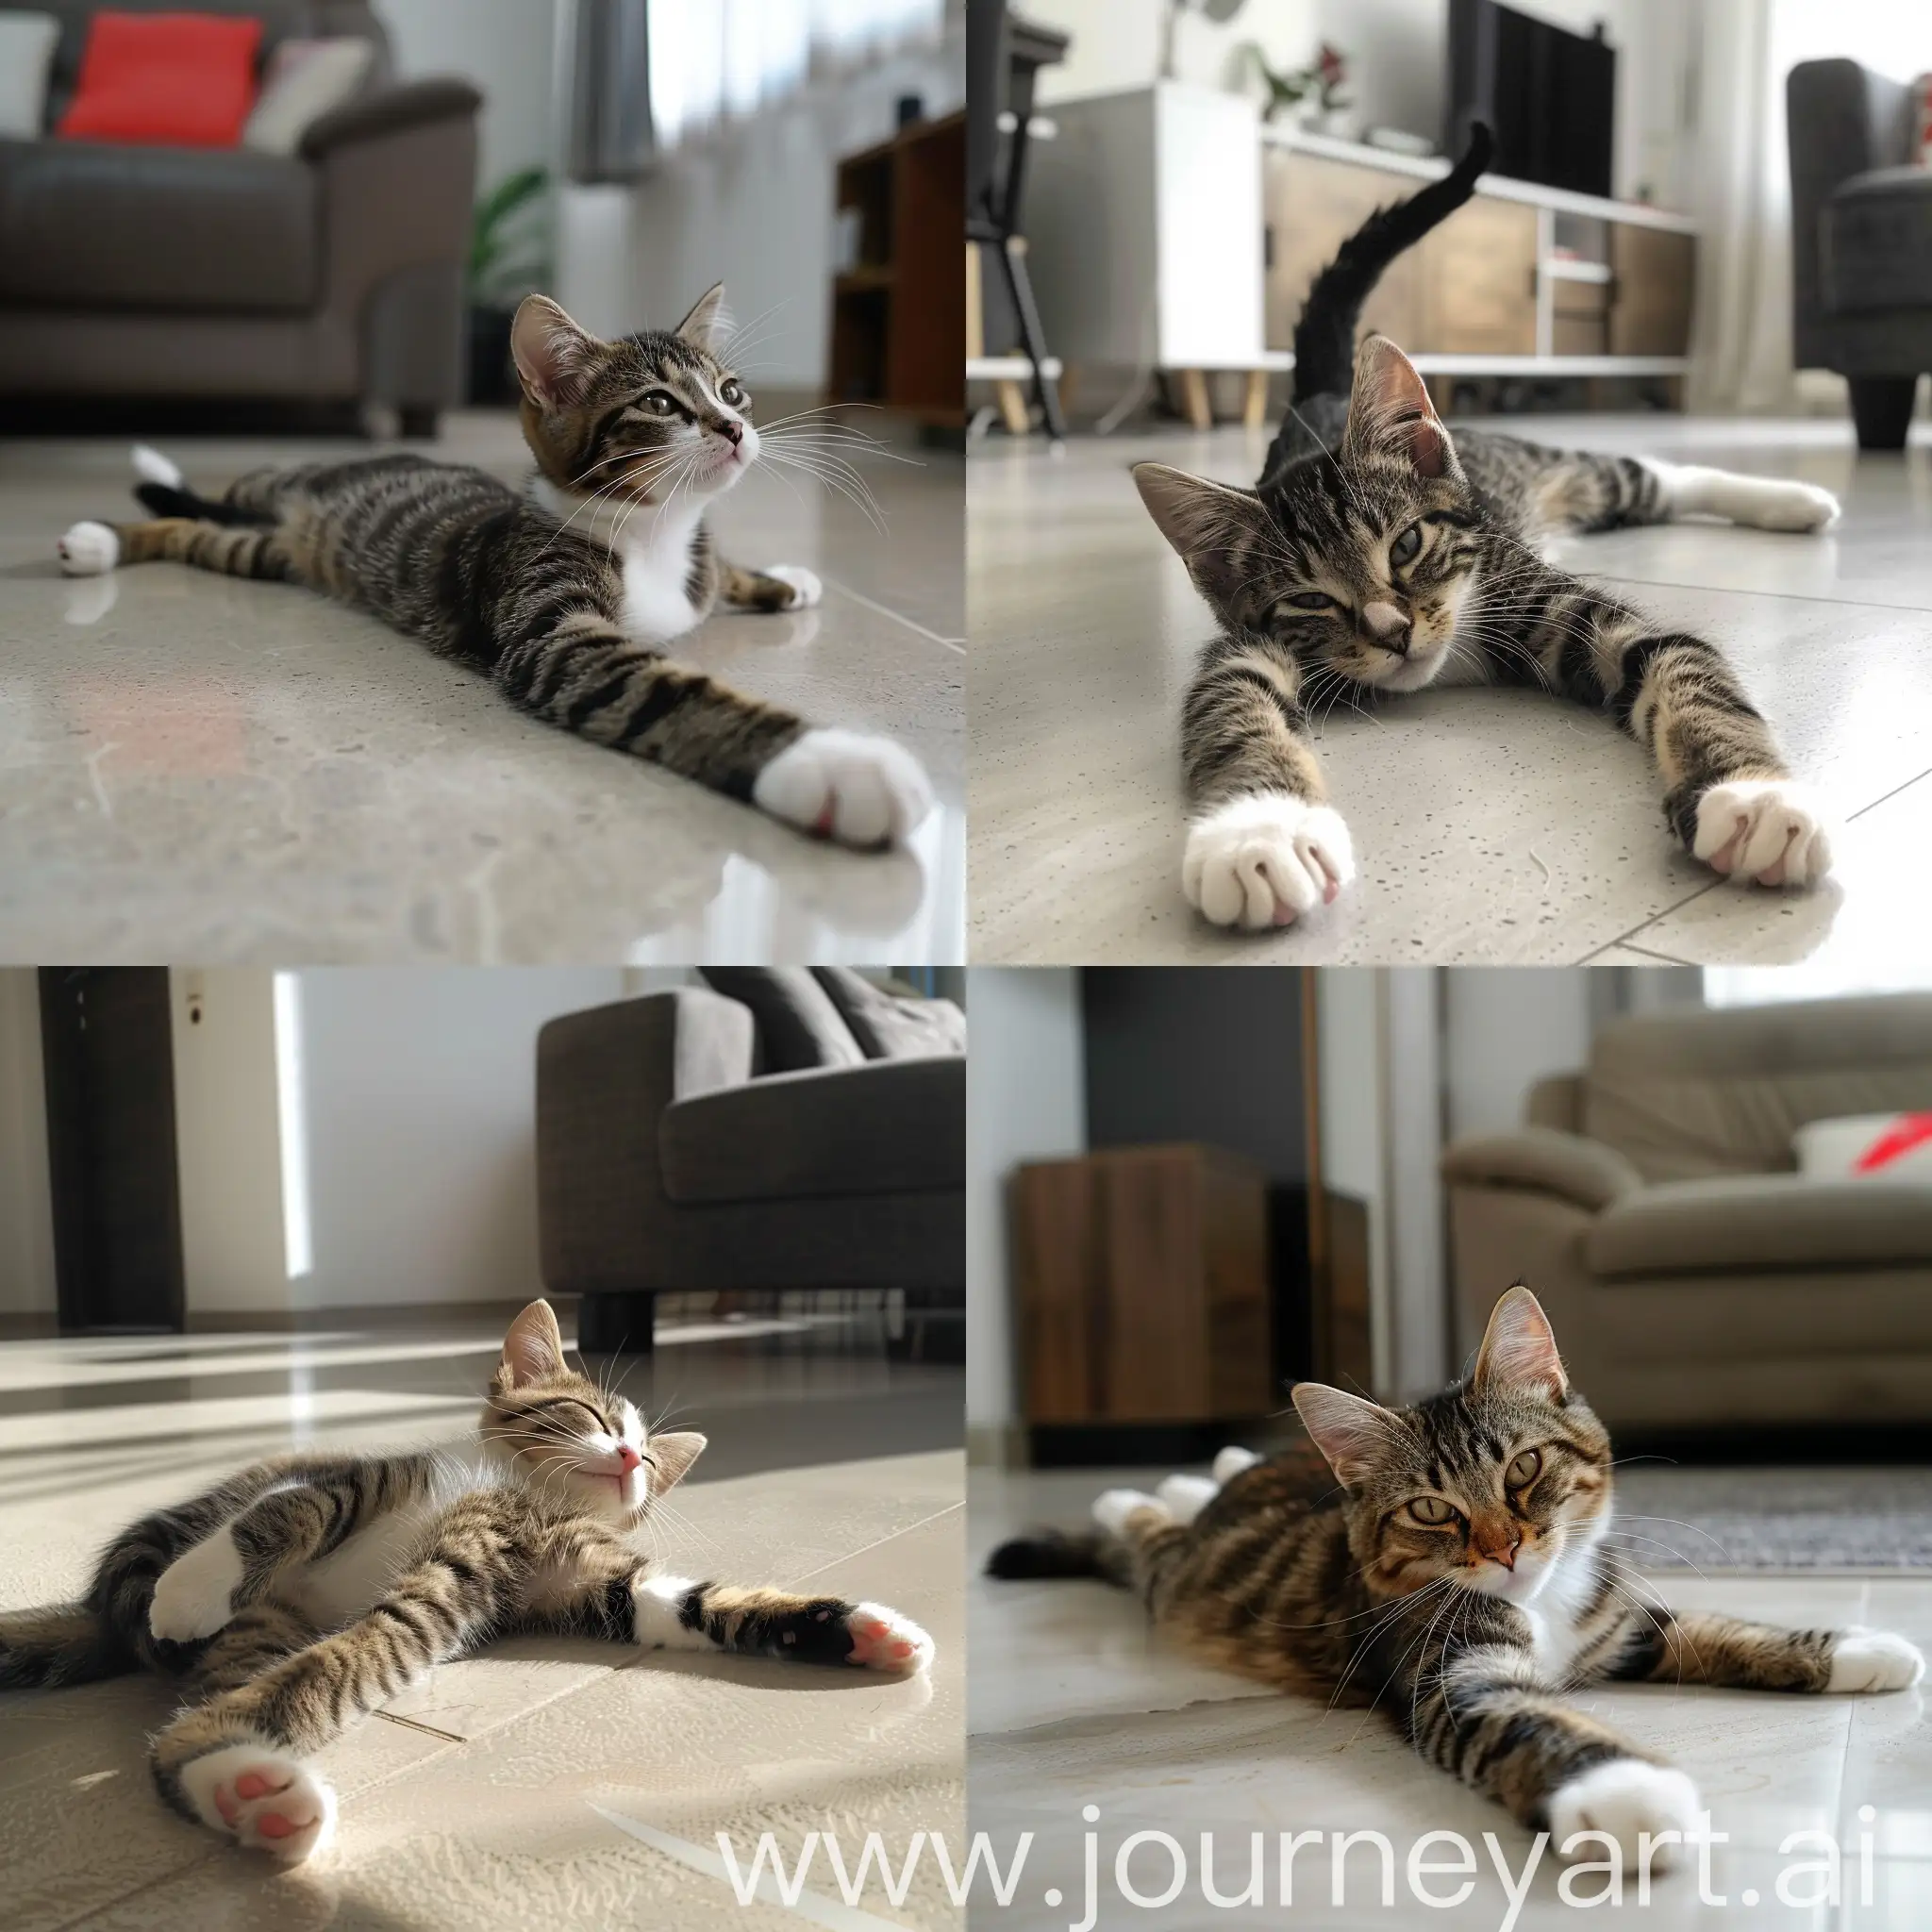 Tabby-Cat-Stretching-Lazily-on-LightColored-Apartment-Floor